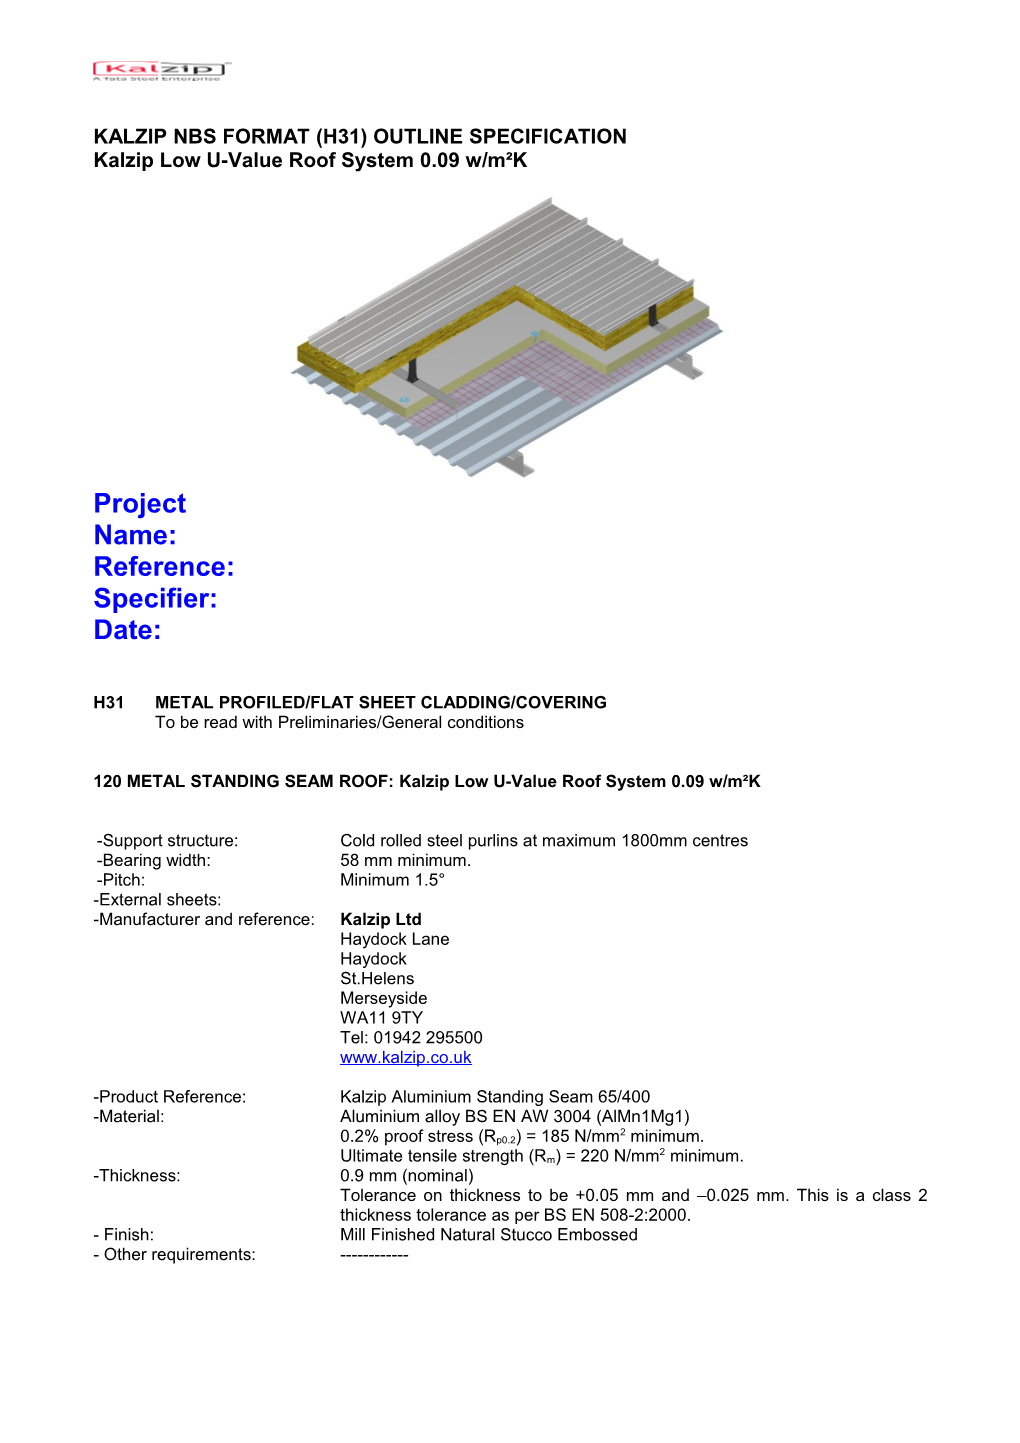 Kalzip Liner Roof System Typical NBS Format Specification (H31)